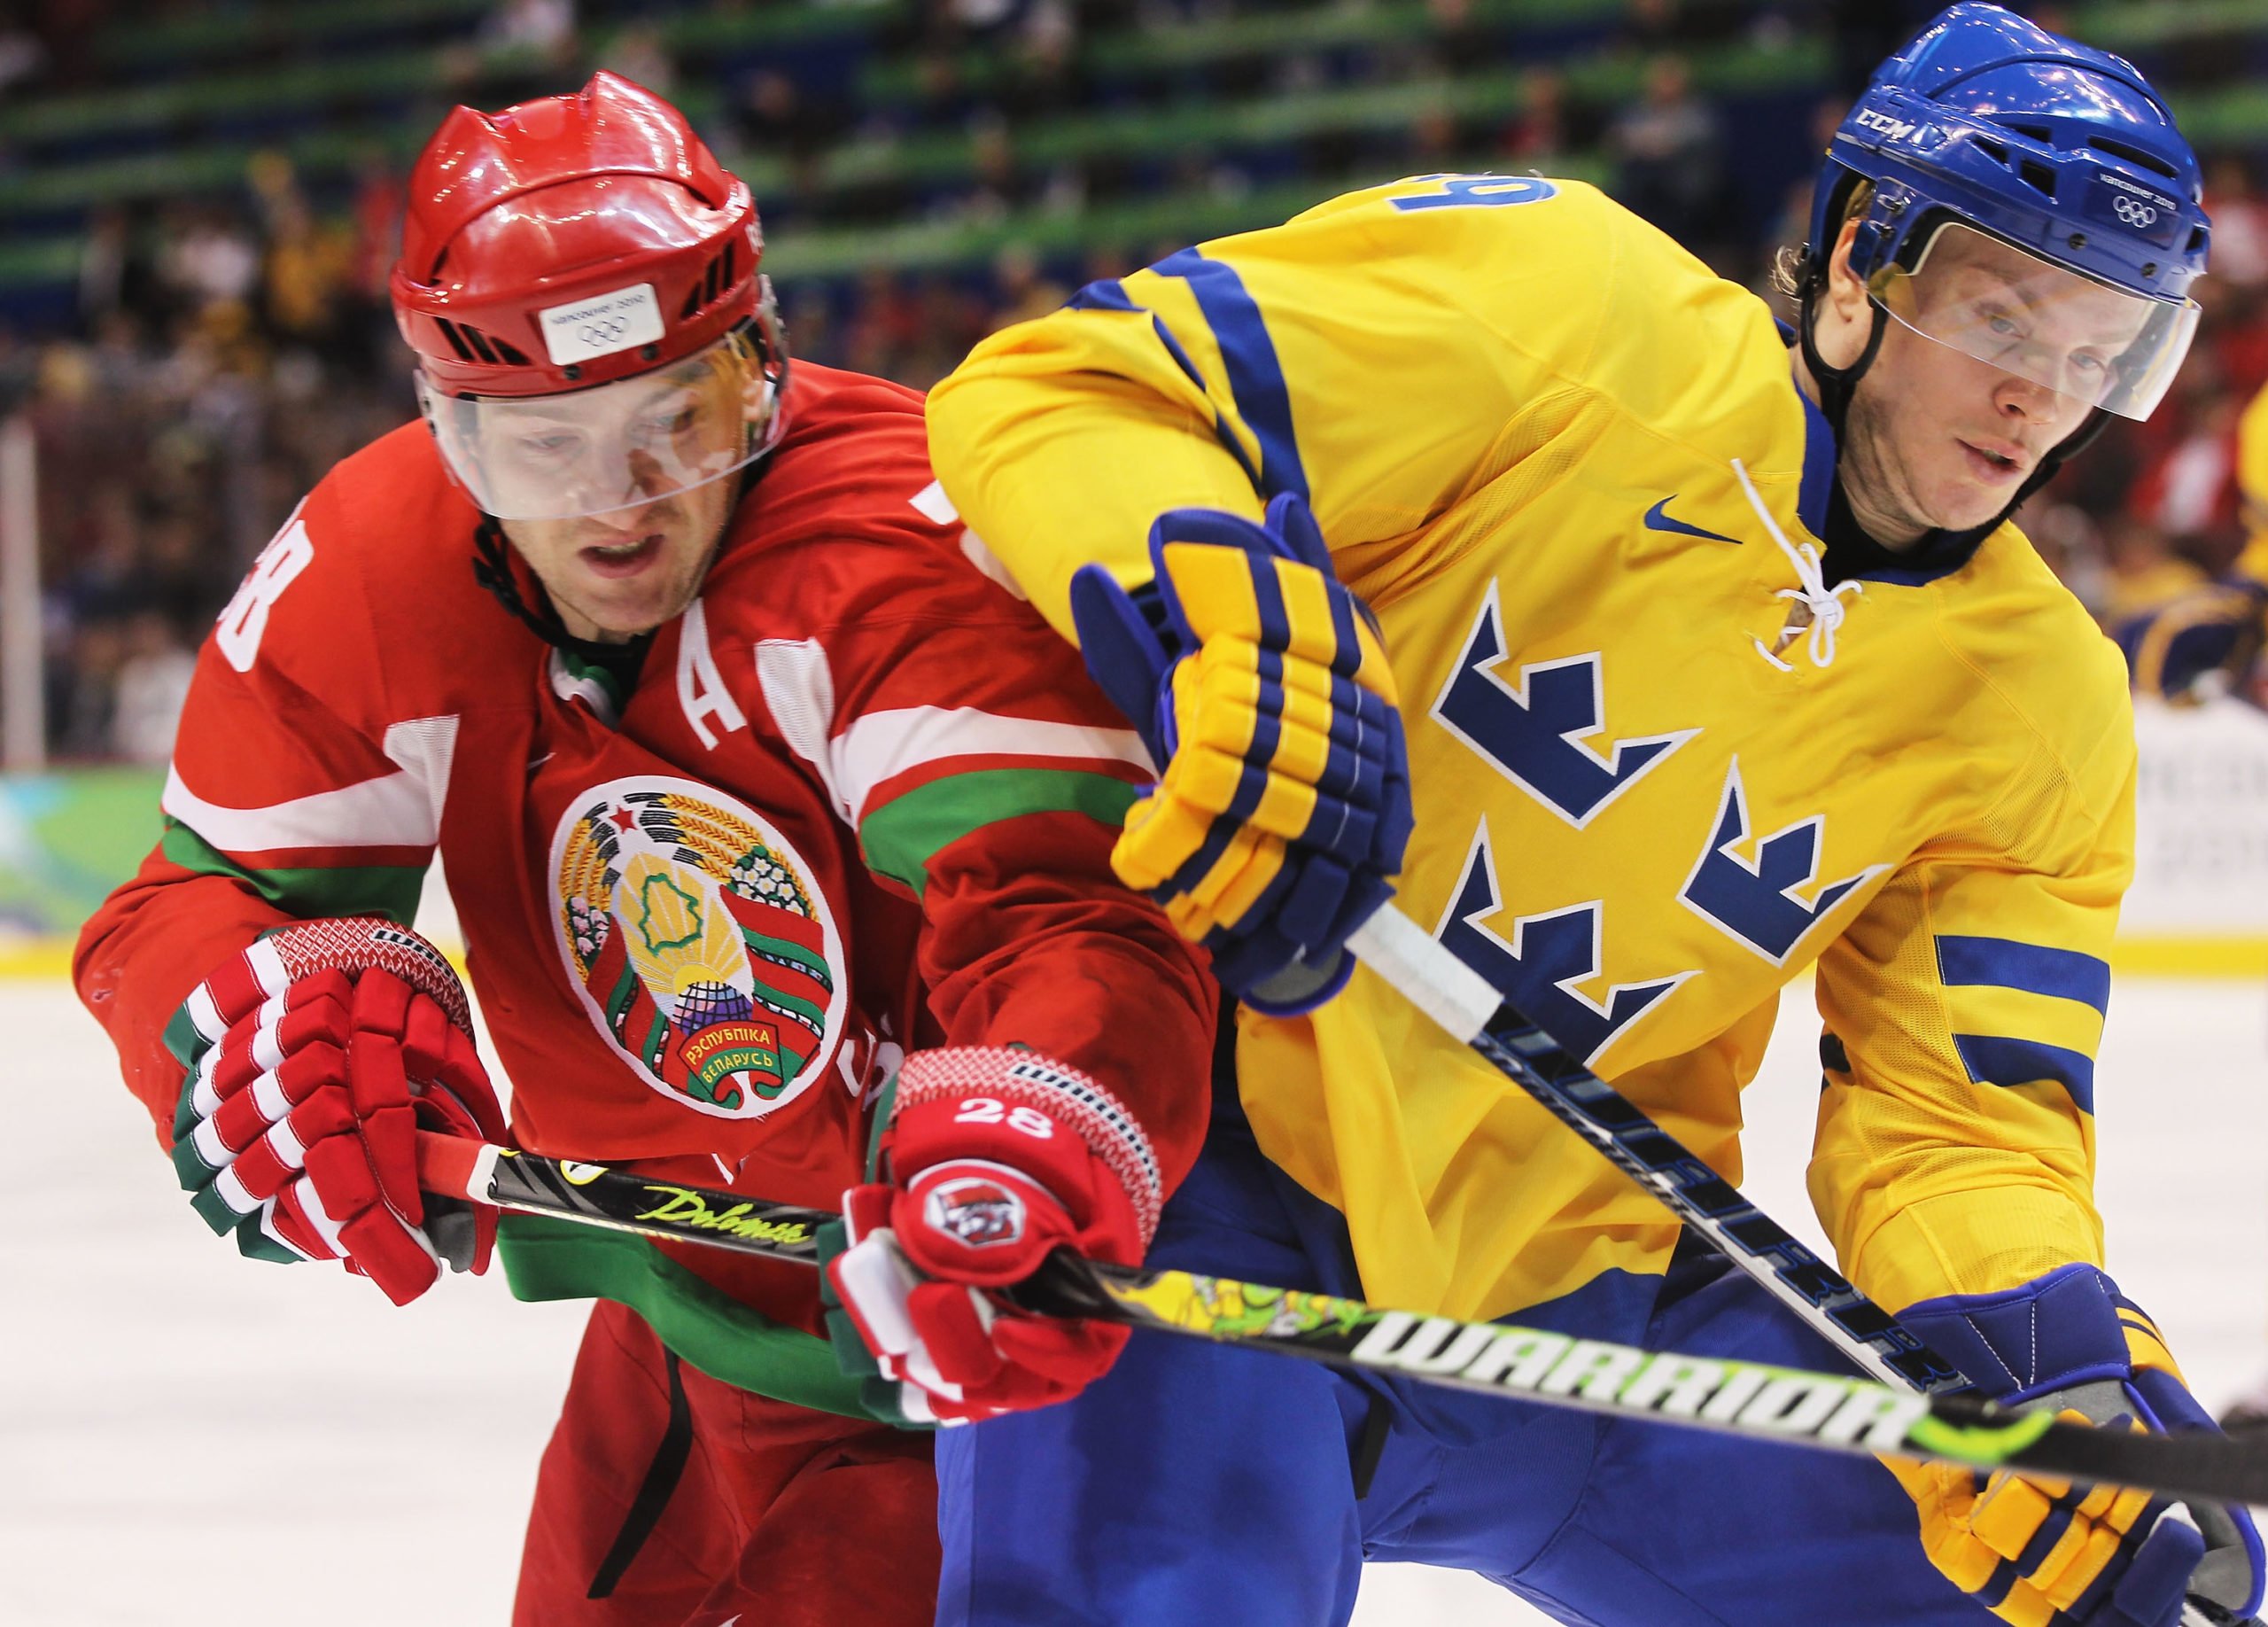 VANCOUVER, BC - FEBRUARY 19: Konstantin Koltsov #28 of Belarus challenges Tobias Enstrom #39 of Sweden for the puck during the ice hockey men's preliminary game on day 8 of the Vancouver 2010 Winter Olympics at Canada Hockey Place on February 19, 2010 in Vancouver, Canada. Jamie Squire/Getty Images